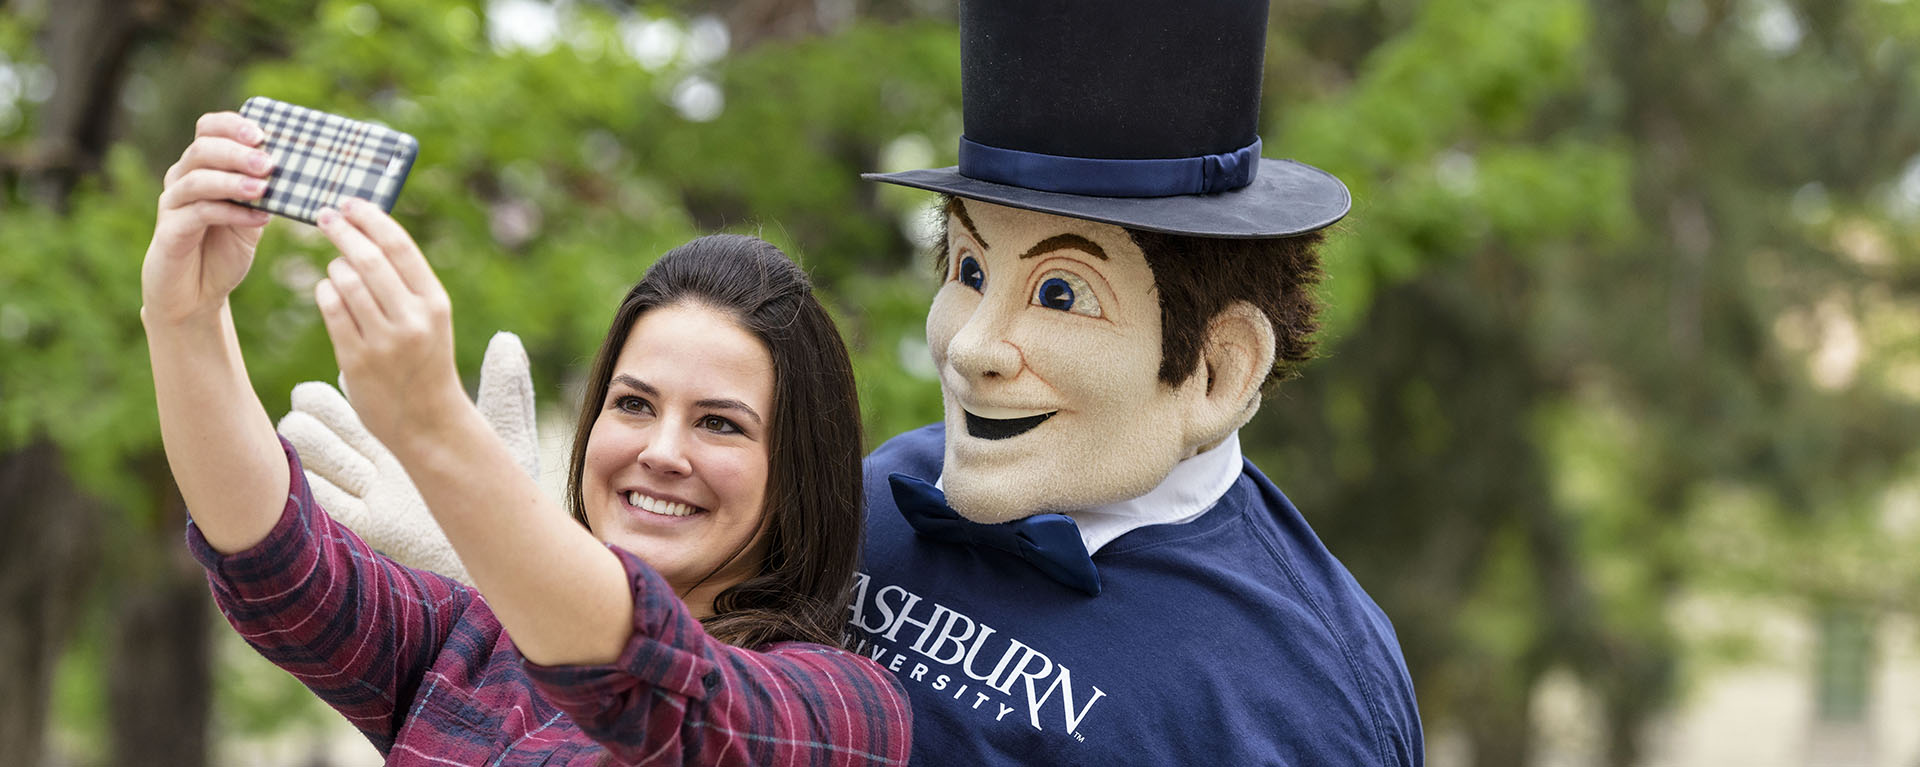 A Washburn student takes a selfie with Mr. Ichabod.